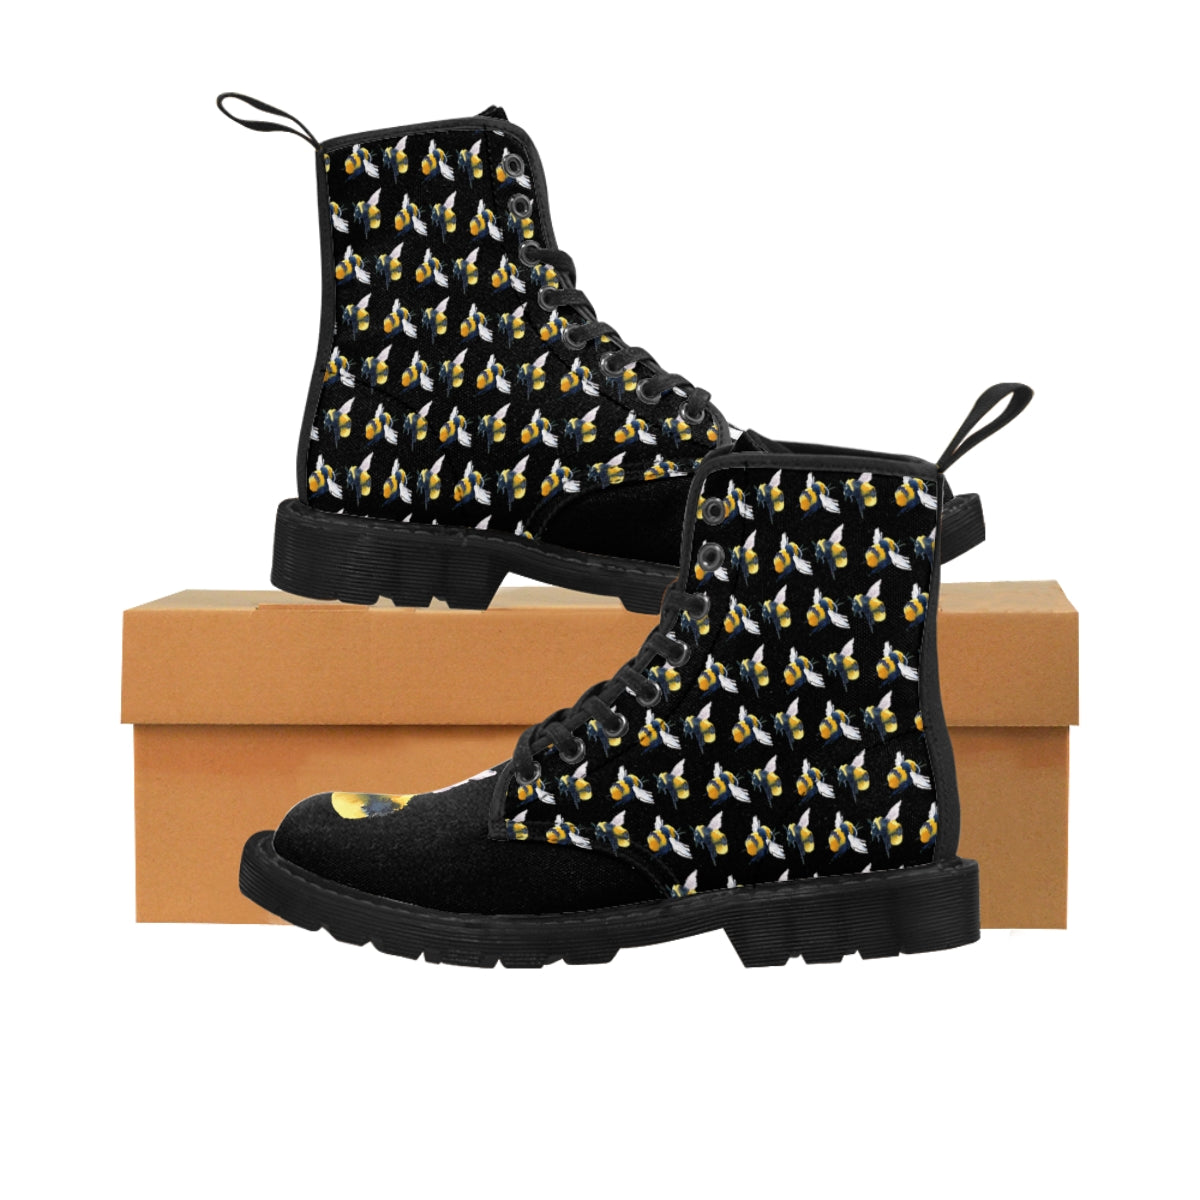 Friendly Flying Bees Men's Black Canvas Boots Black Shoes Bee boots combat boots gift for bee lover gift for him Mens boots mens fashion boots mens shoes Shoes unique mens boots vegan boots vegan combat boots